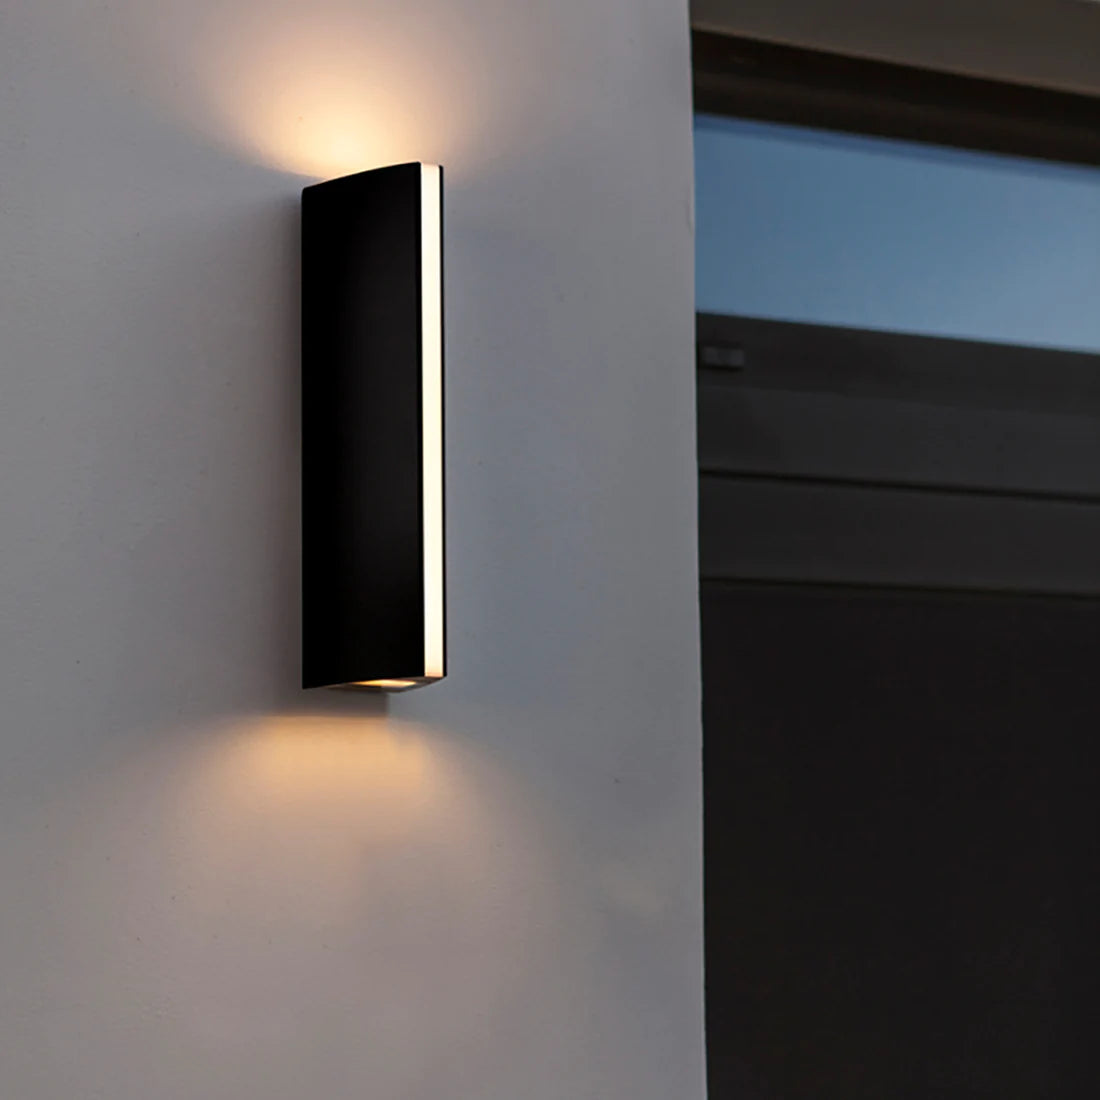 Our Wendy dark grey outdoor wall mounted geometric outdoor wall light would look perfect in a modern or more traditional home design. Outside wall lights can provide atmospheric light in your garden, at the front door or on the terrace as well as a great security solution. It is designed for durability and longevity with its robust material producing a fully weatherproof and water resistant light fitting. 